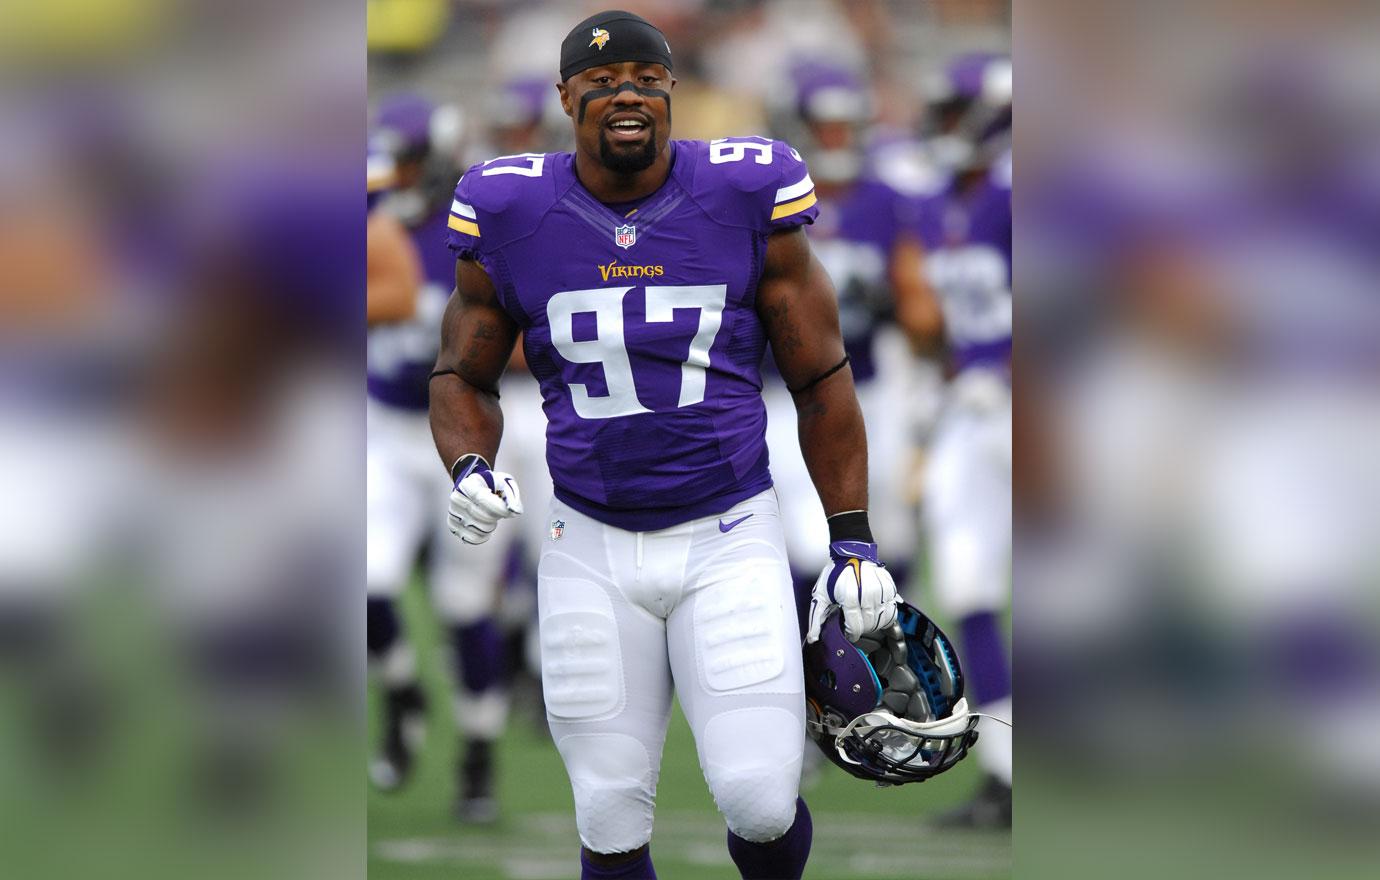 Everson Griffen of Minnesota Vikings was eager for elusive Pro